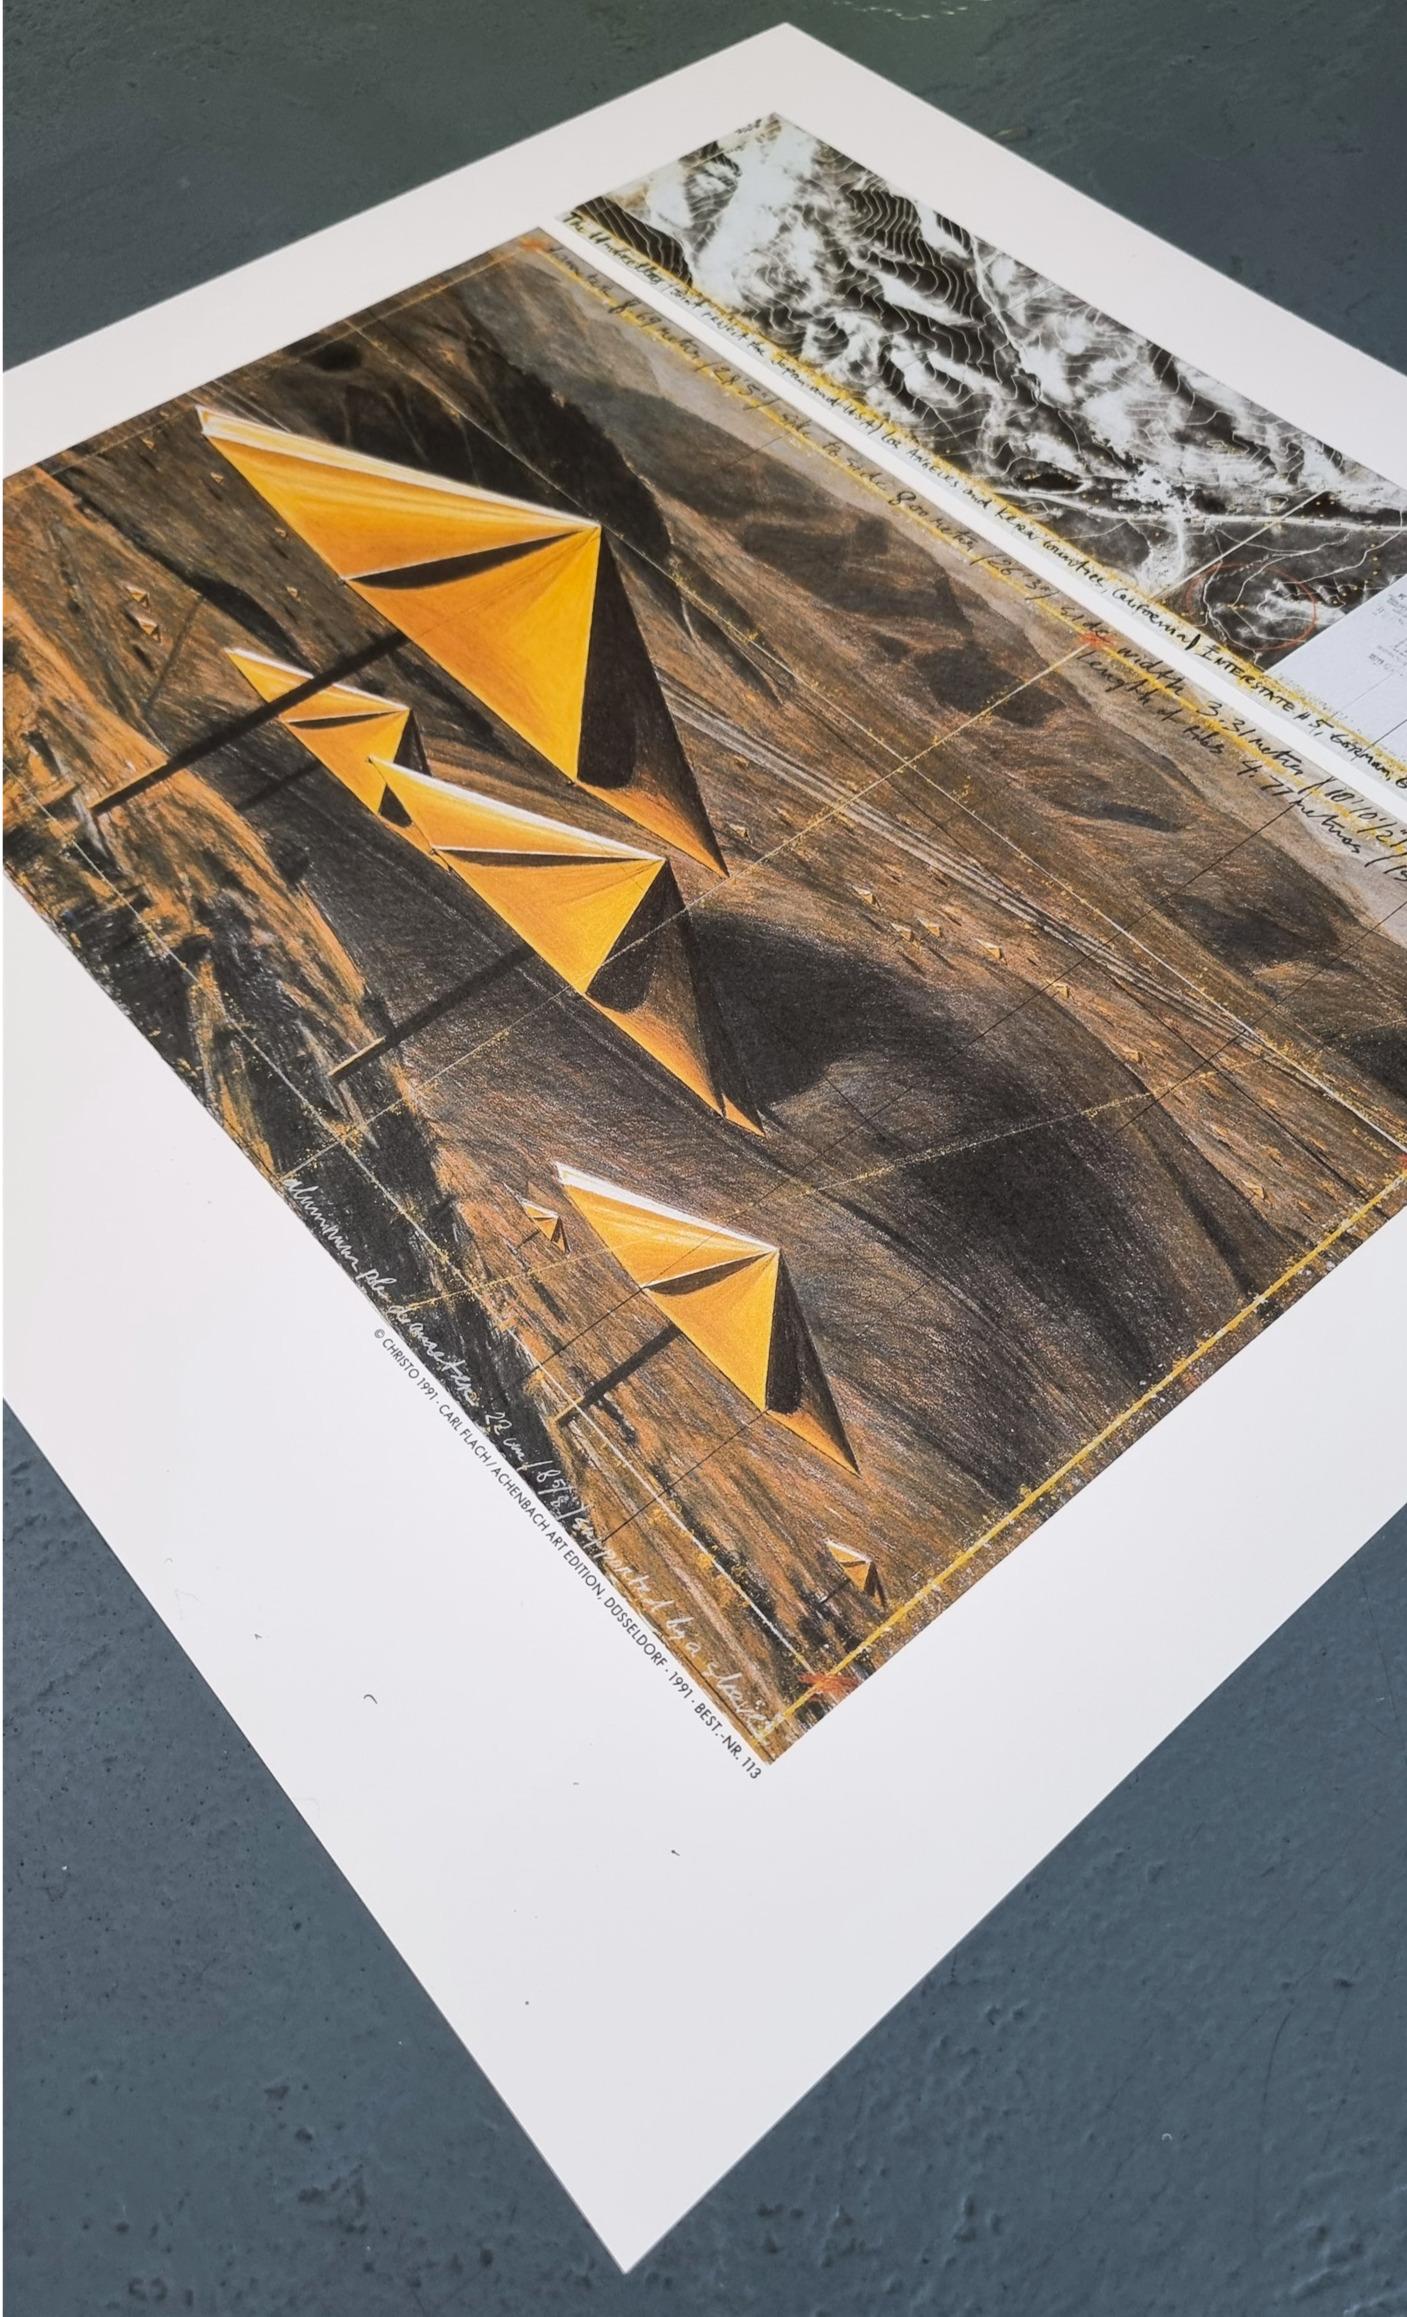 The Umbrellas (Yellow) (Jeanne Claude, Installation, Iconic) - Modern Print by Christo and Jeanne-Claude